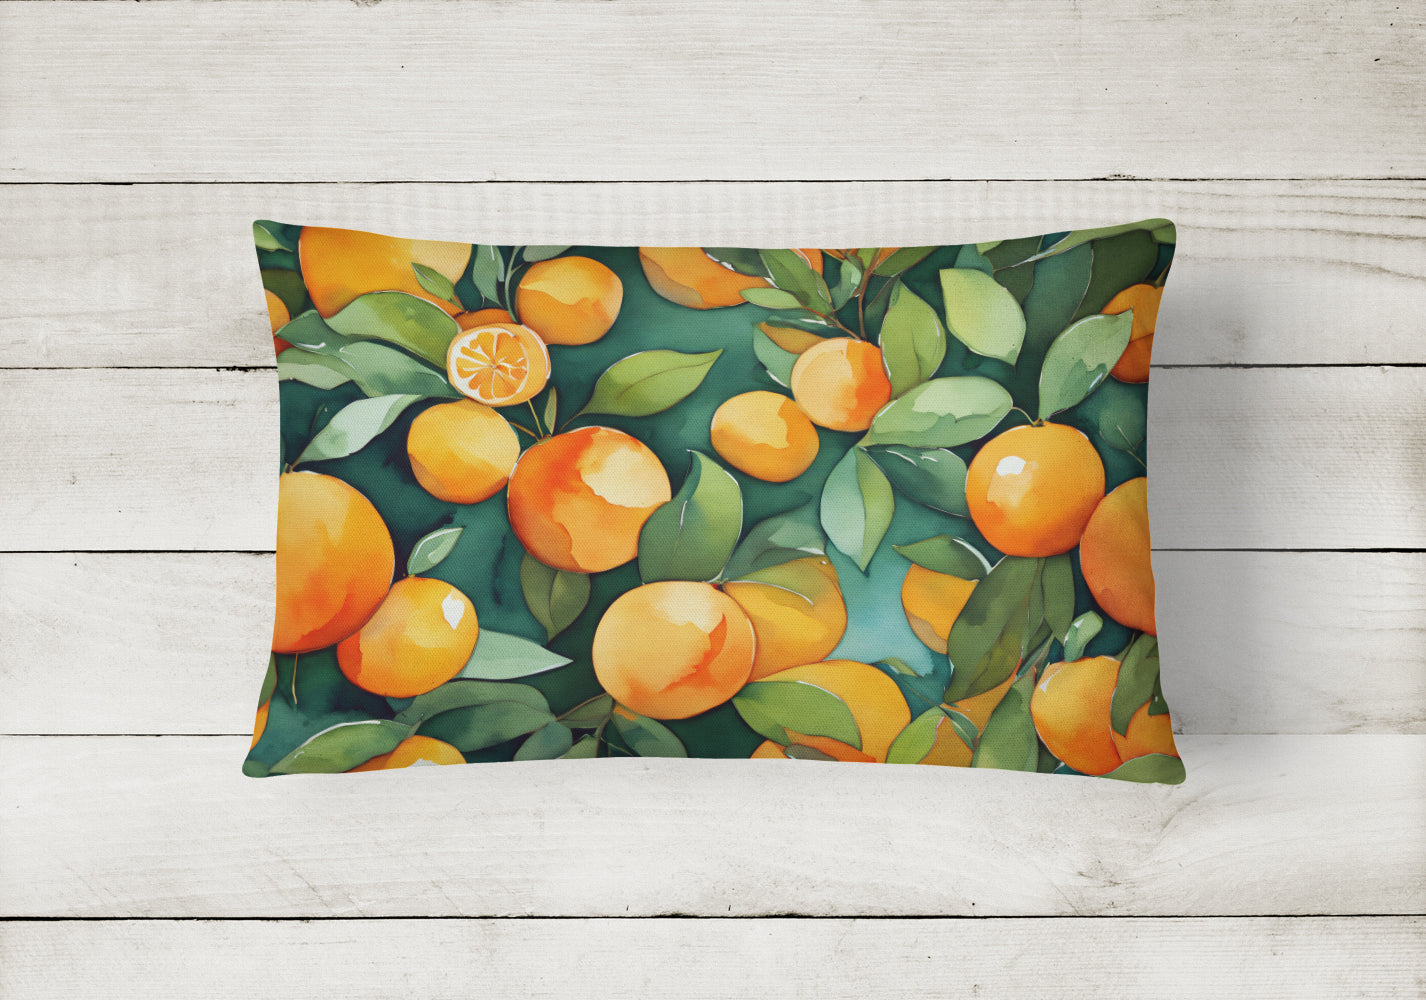 Buy this Florida Orange Blossom in Watercolor Fabric Decorative Pillow